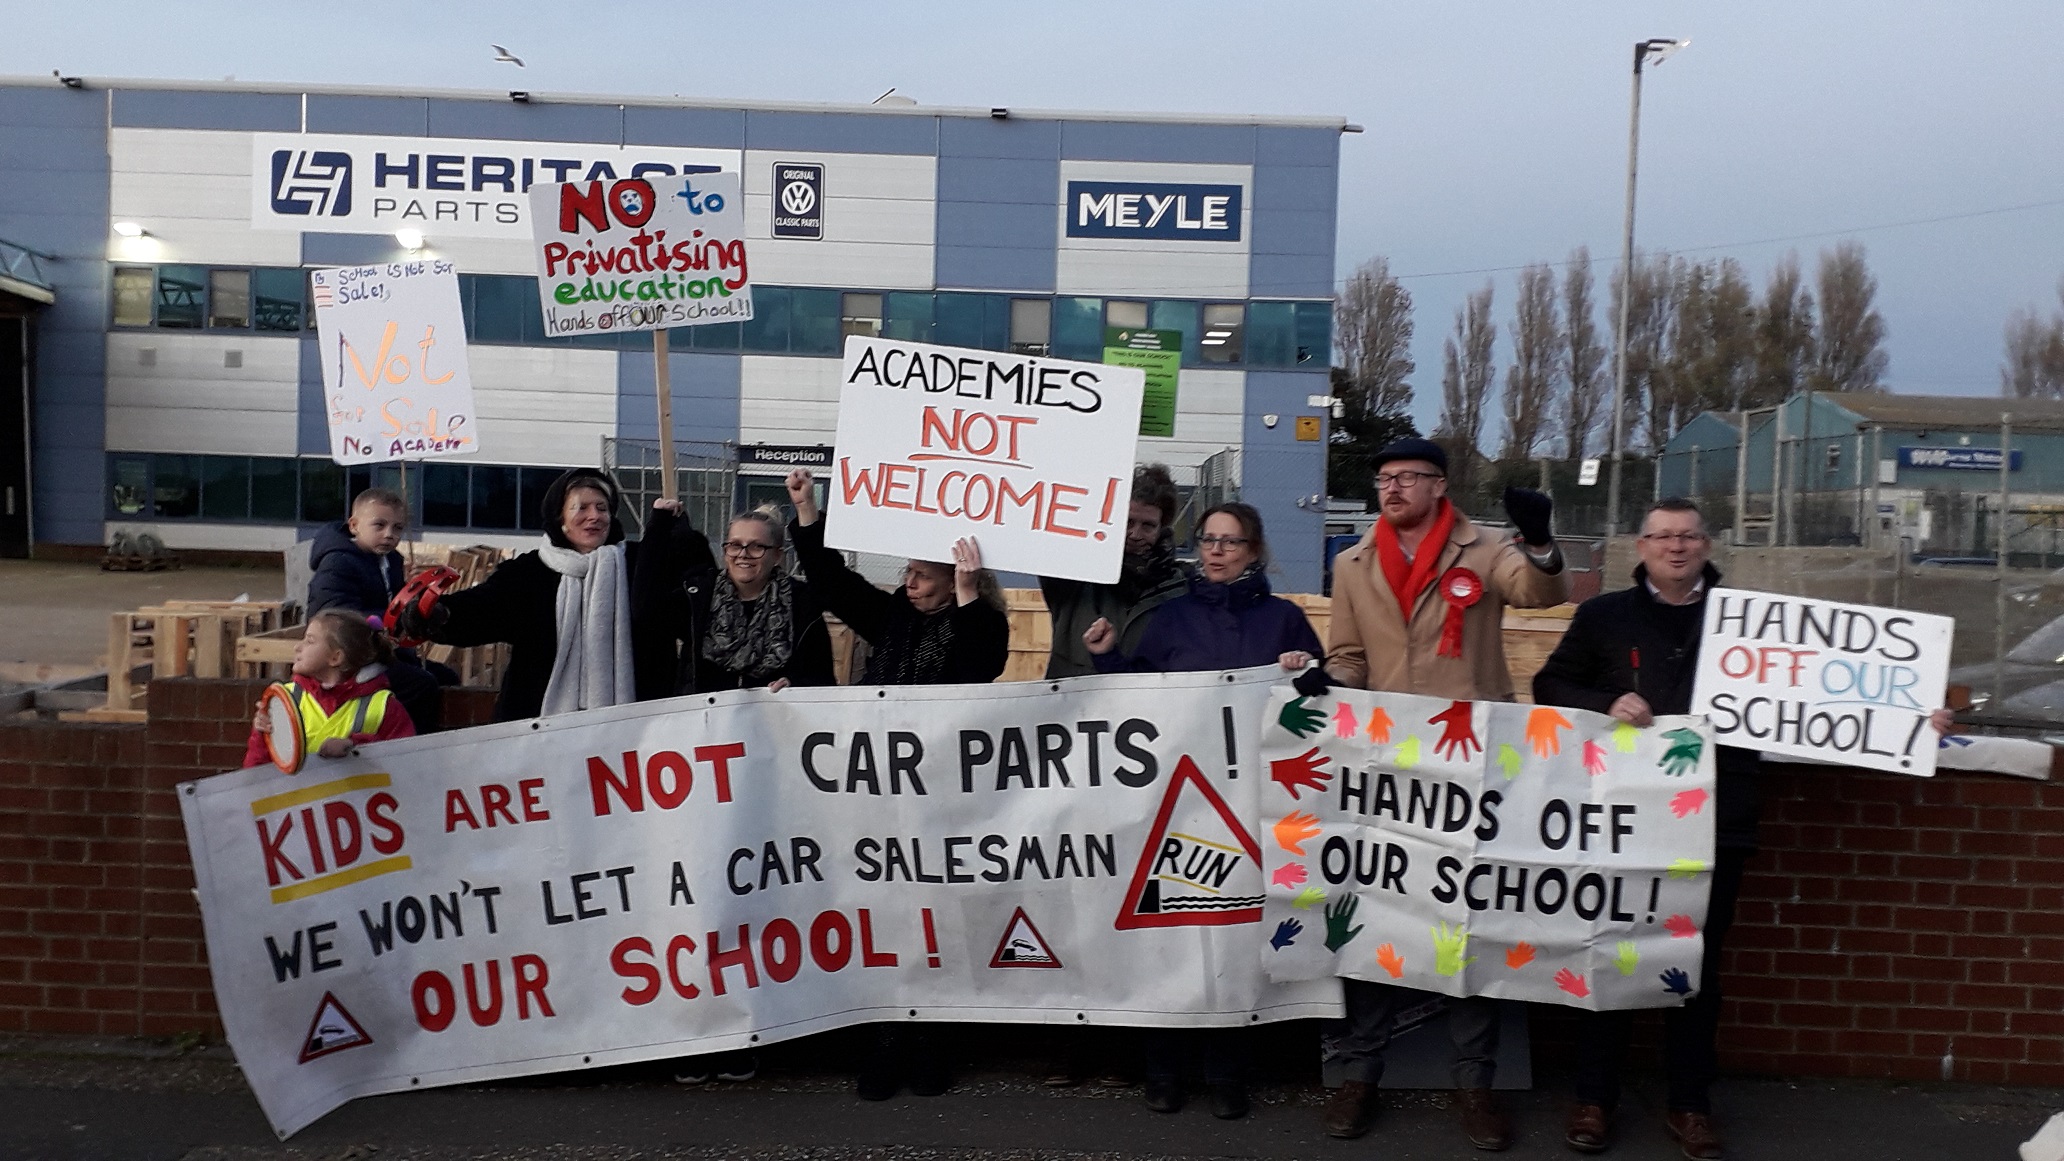 Parents protest outside academy trustee's workplace - Brighton and Hove News